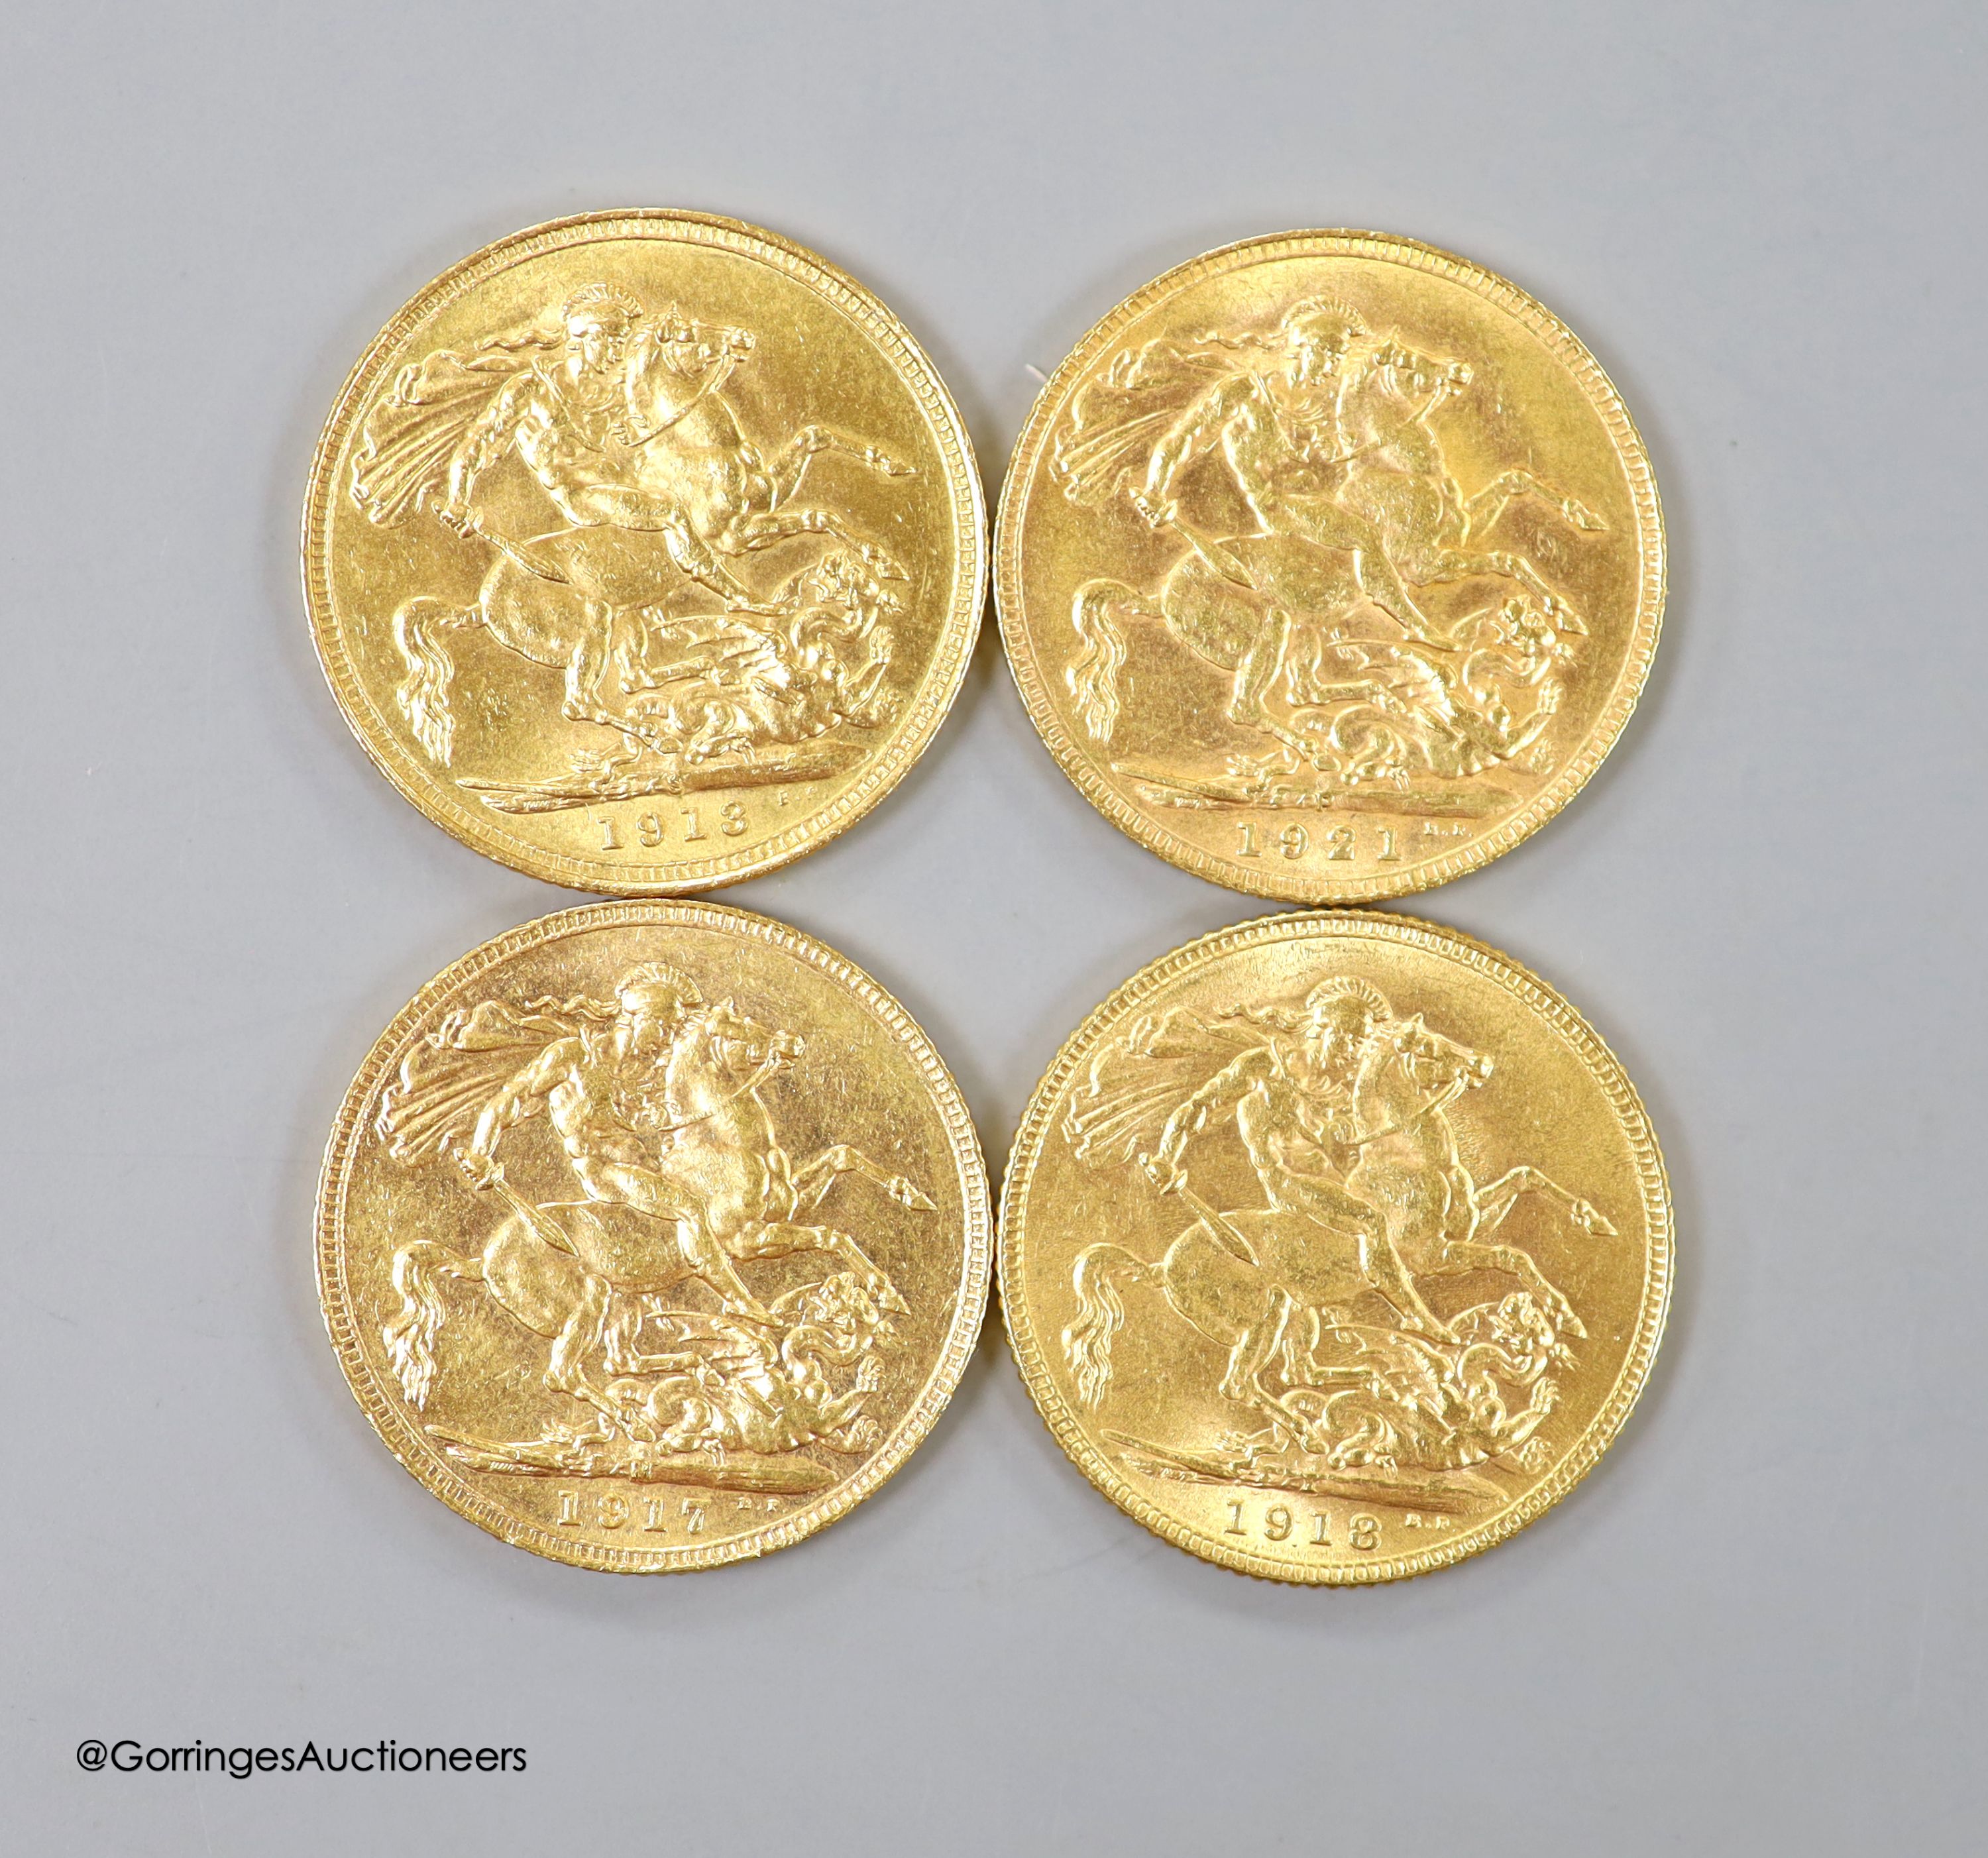 Four George V gold sovereigns, 1913 (one Sydney mint) 1917M, 1918 and 1921P